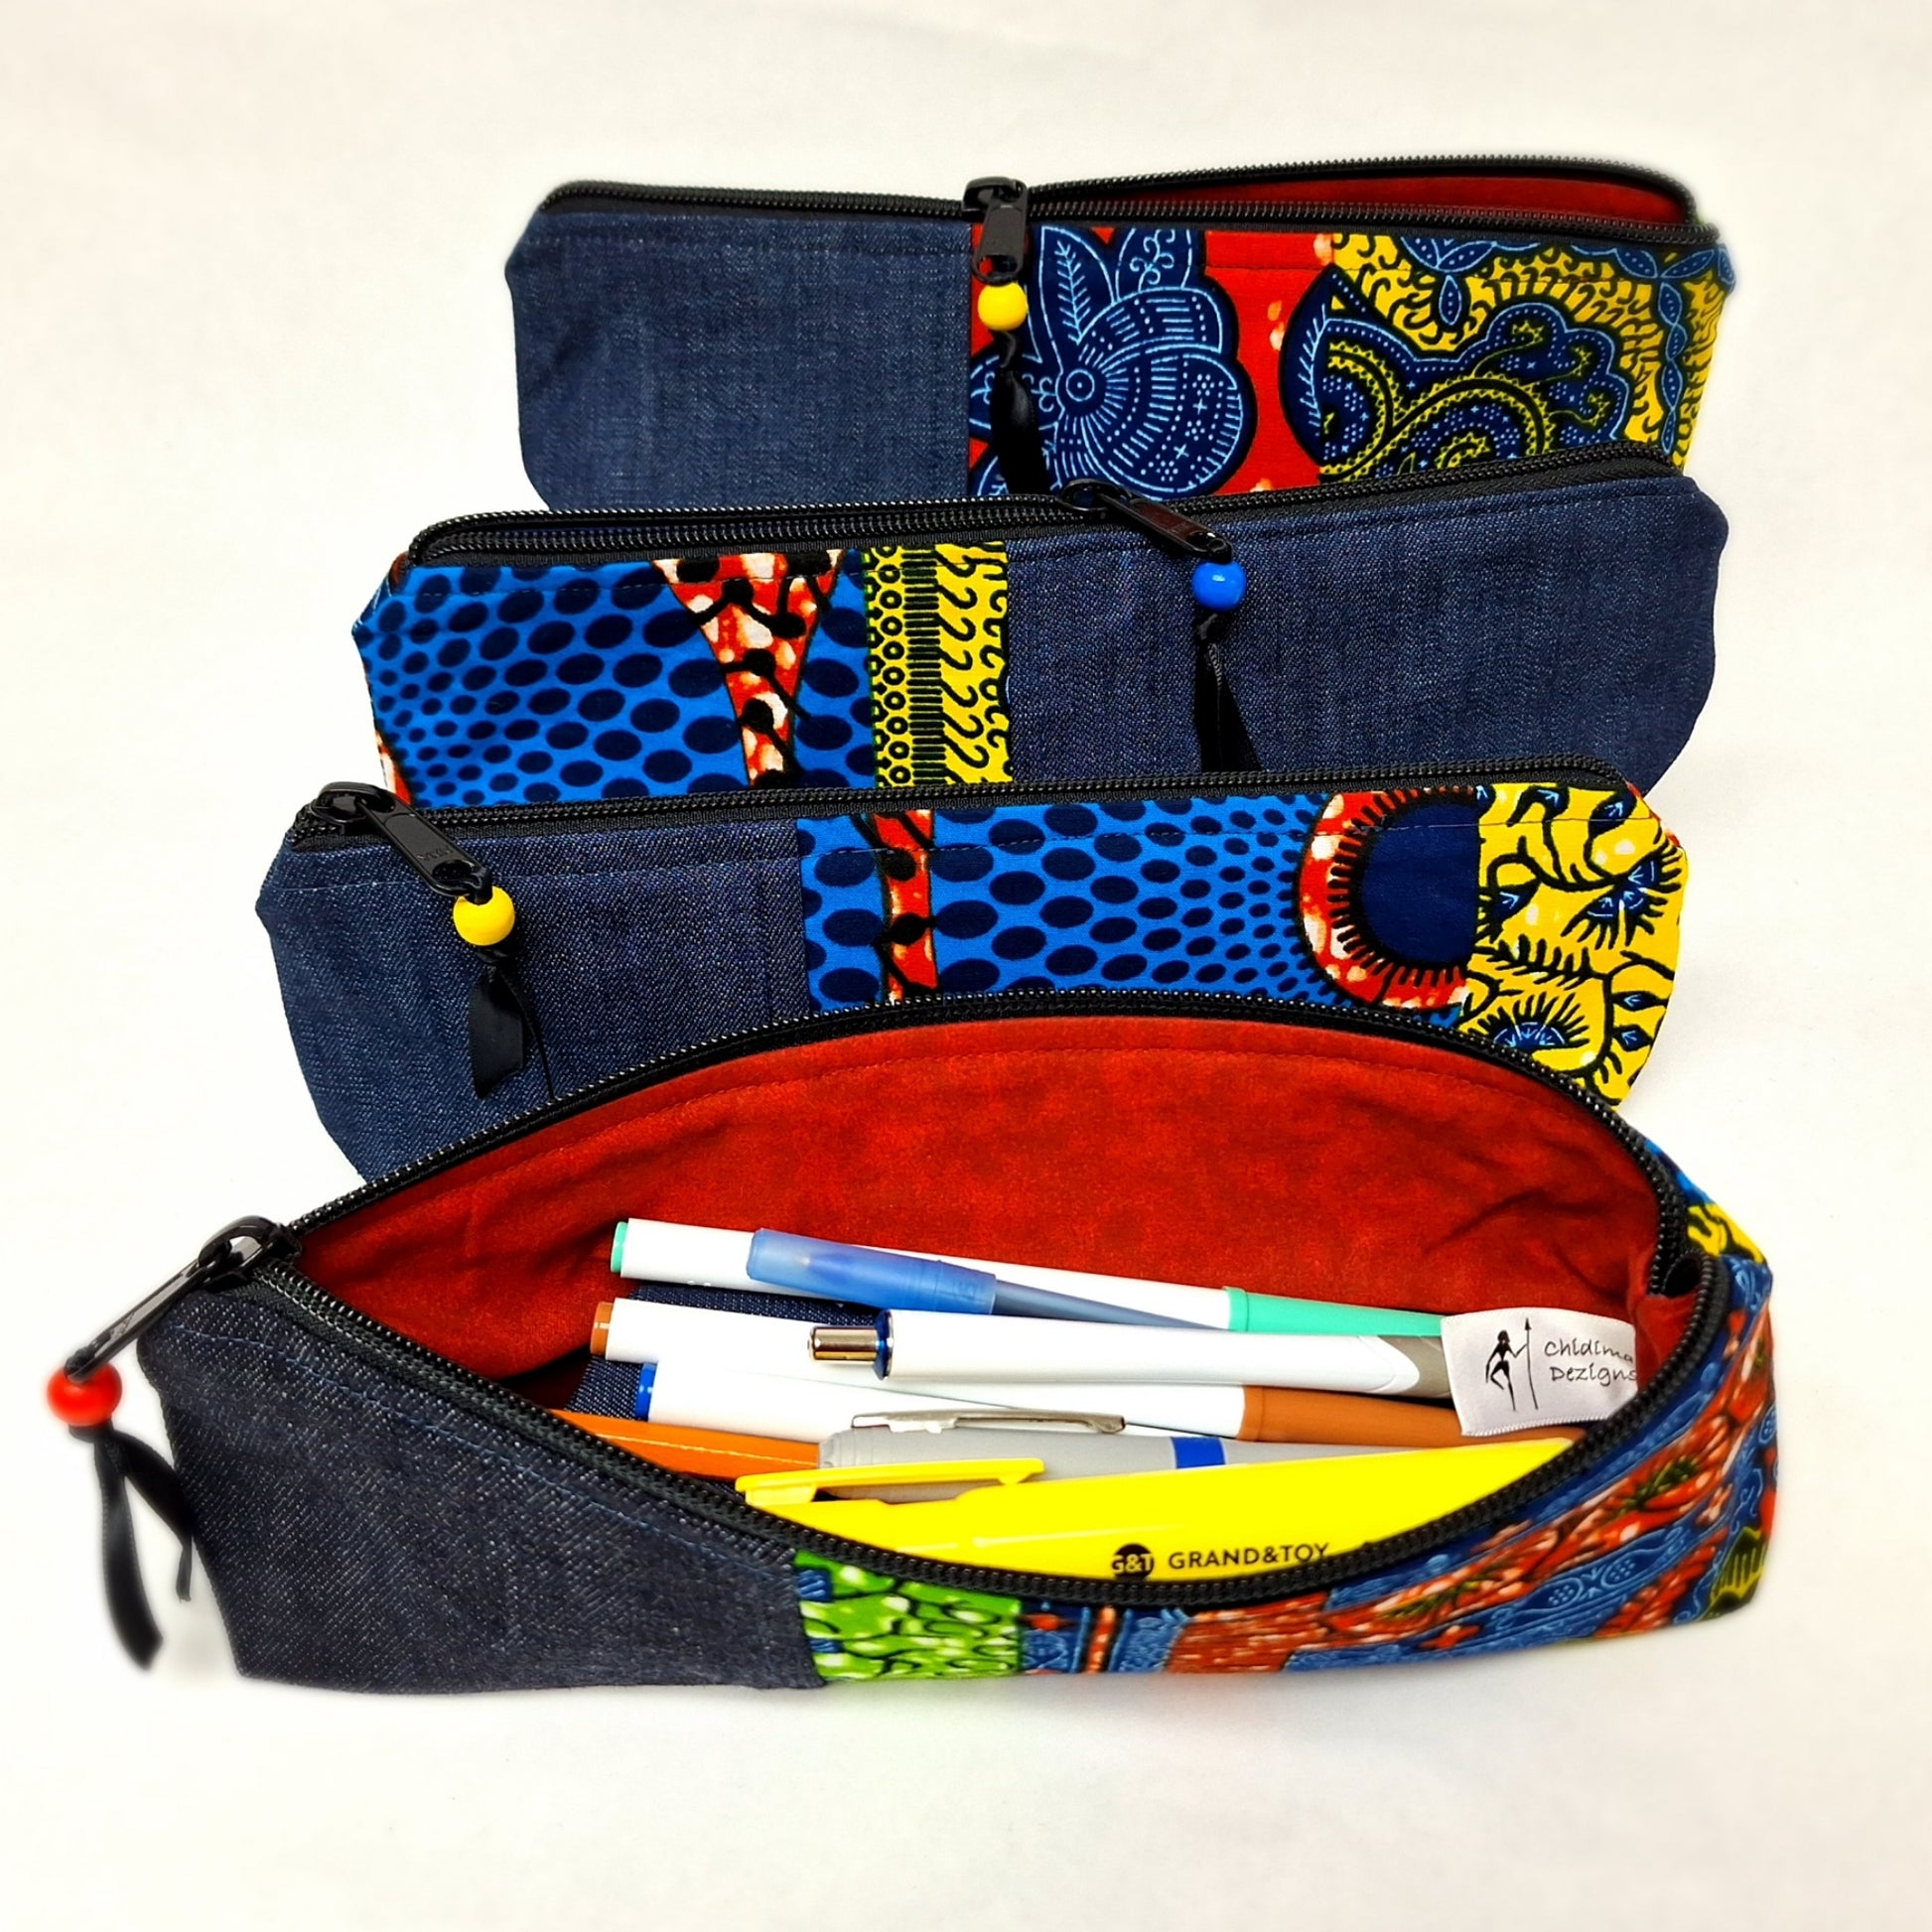 Slim zipper pouch made of bright African prints and denim.  Use it as a pencil case, make-up of whatever you wish. measure  approximately 11' long, 3" tall and 2" wide at the base. 